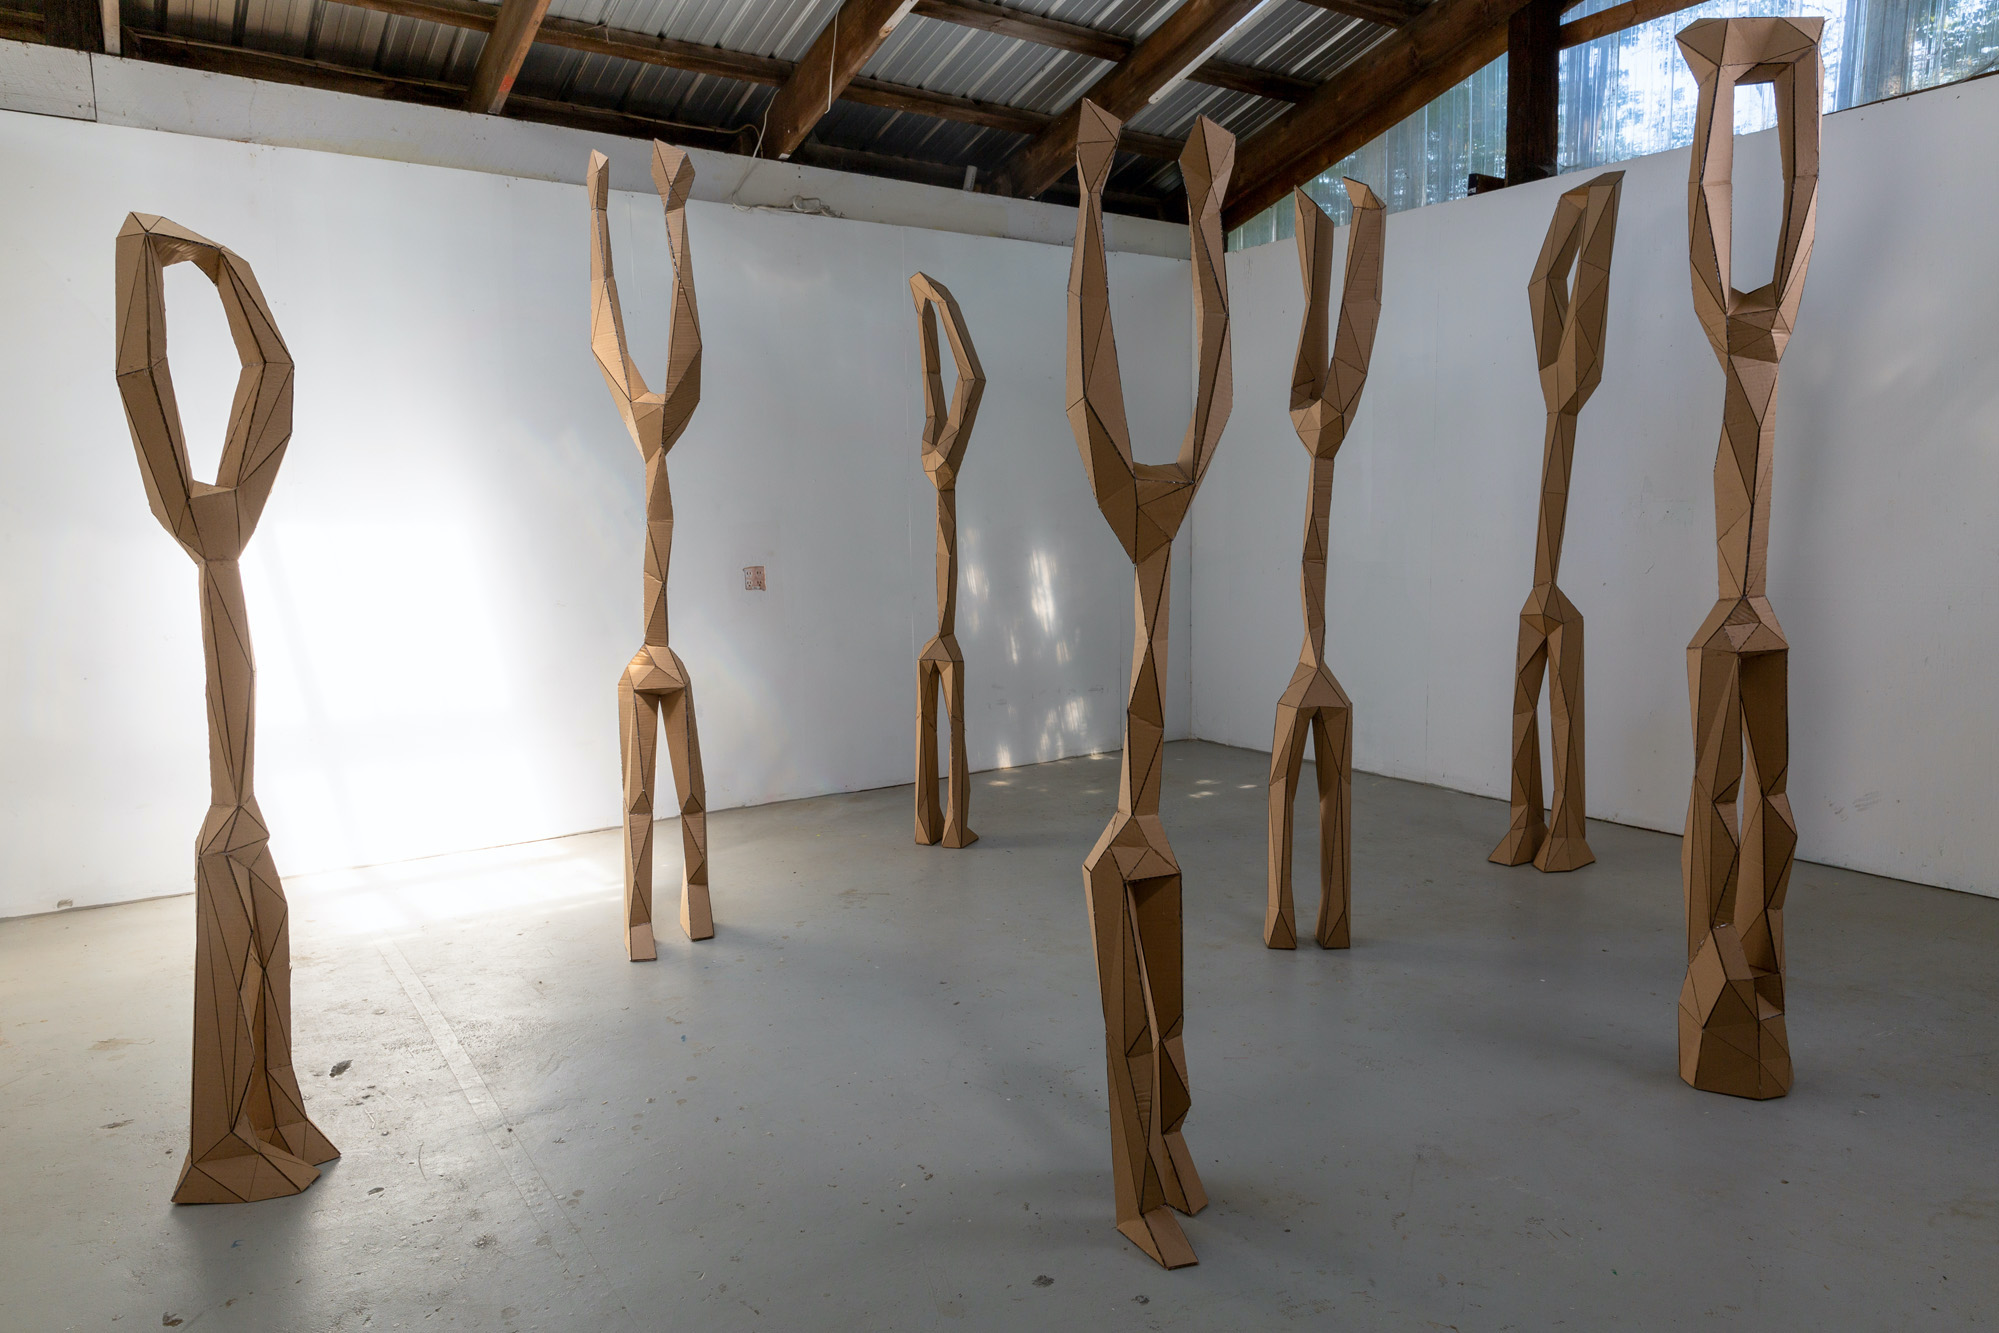 seven abstracted figured standing in a gallery space resembling figures with their hands up.